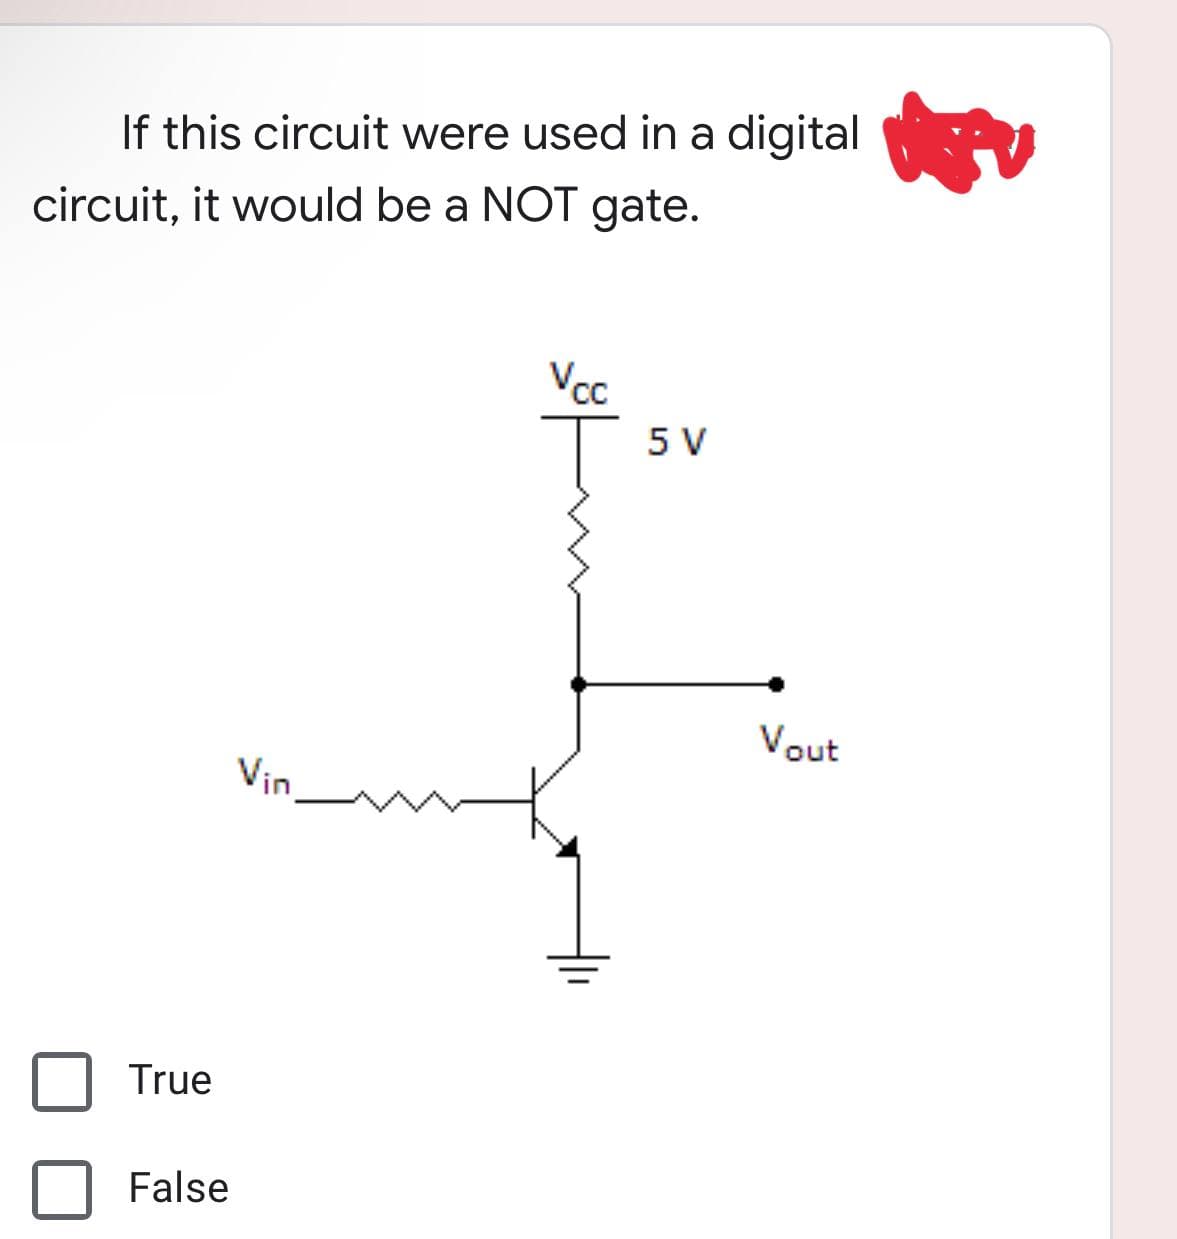 If this circuit were used in a digital
circuit, it would be a NOT gate.
Vcc
5 V
Vin
True
False
Vout
14